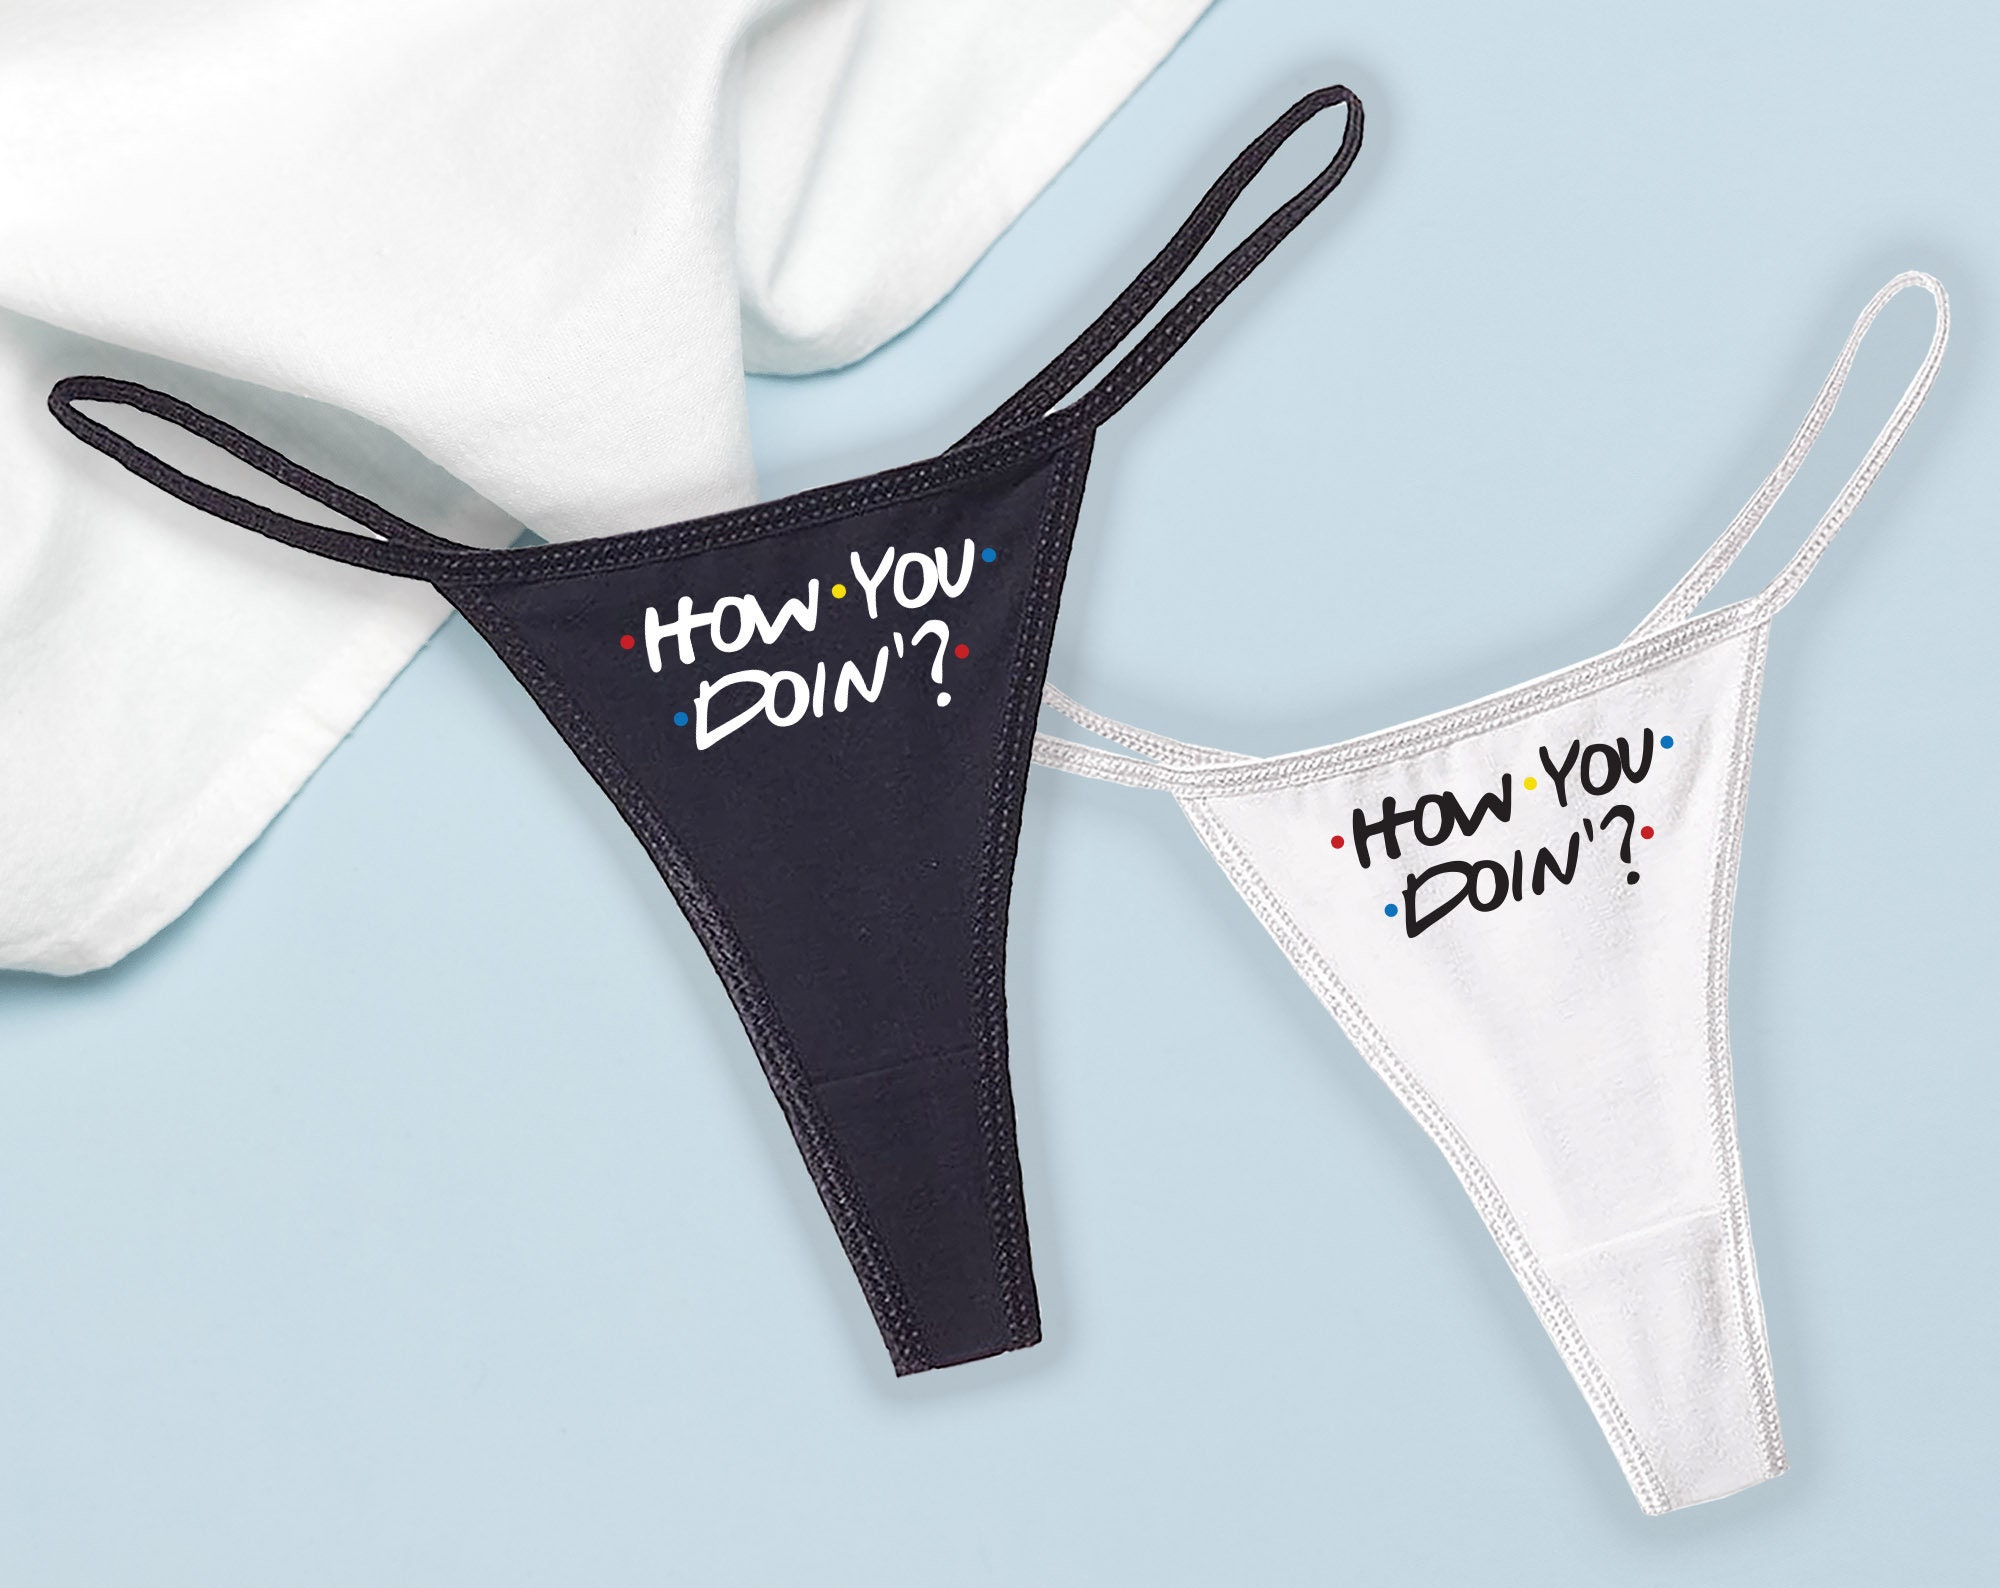 How You Doin' White Thong Friends Panties Sexy Underwear Lingerie 